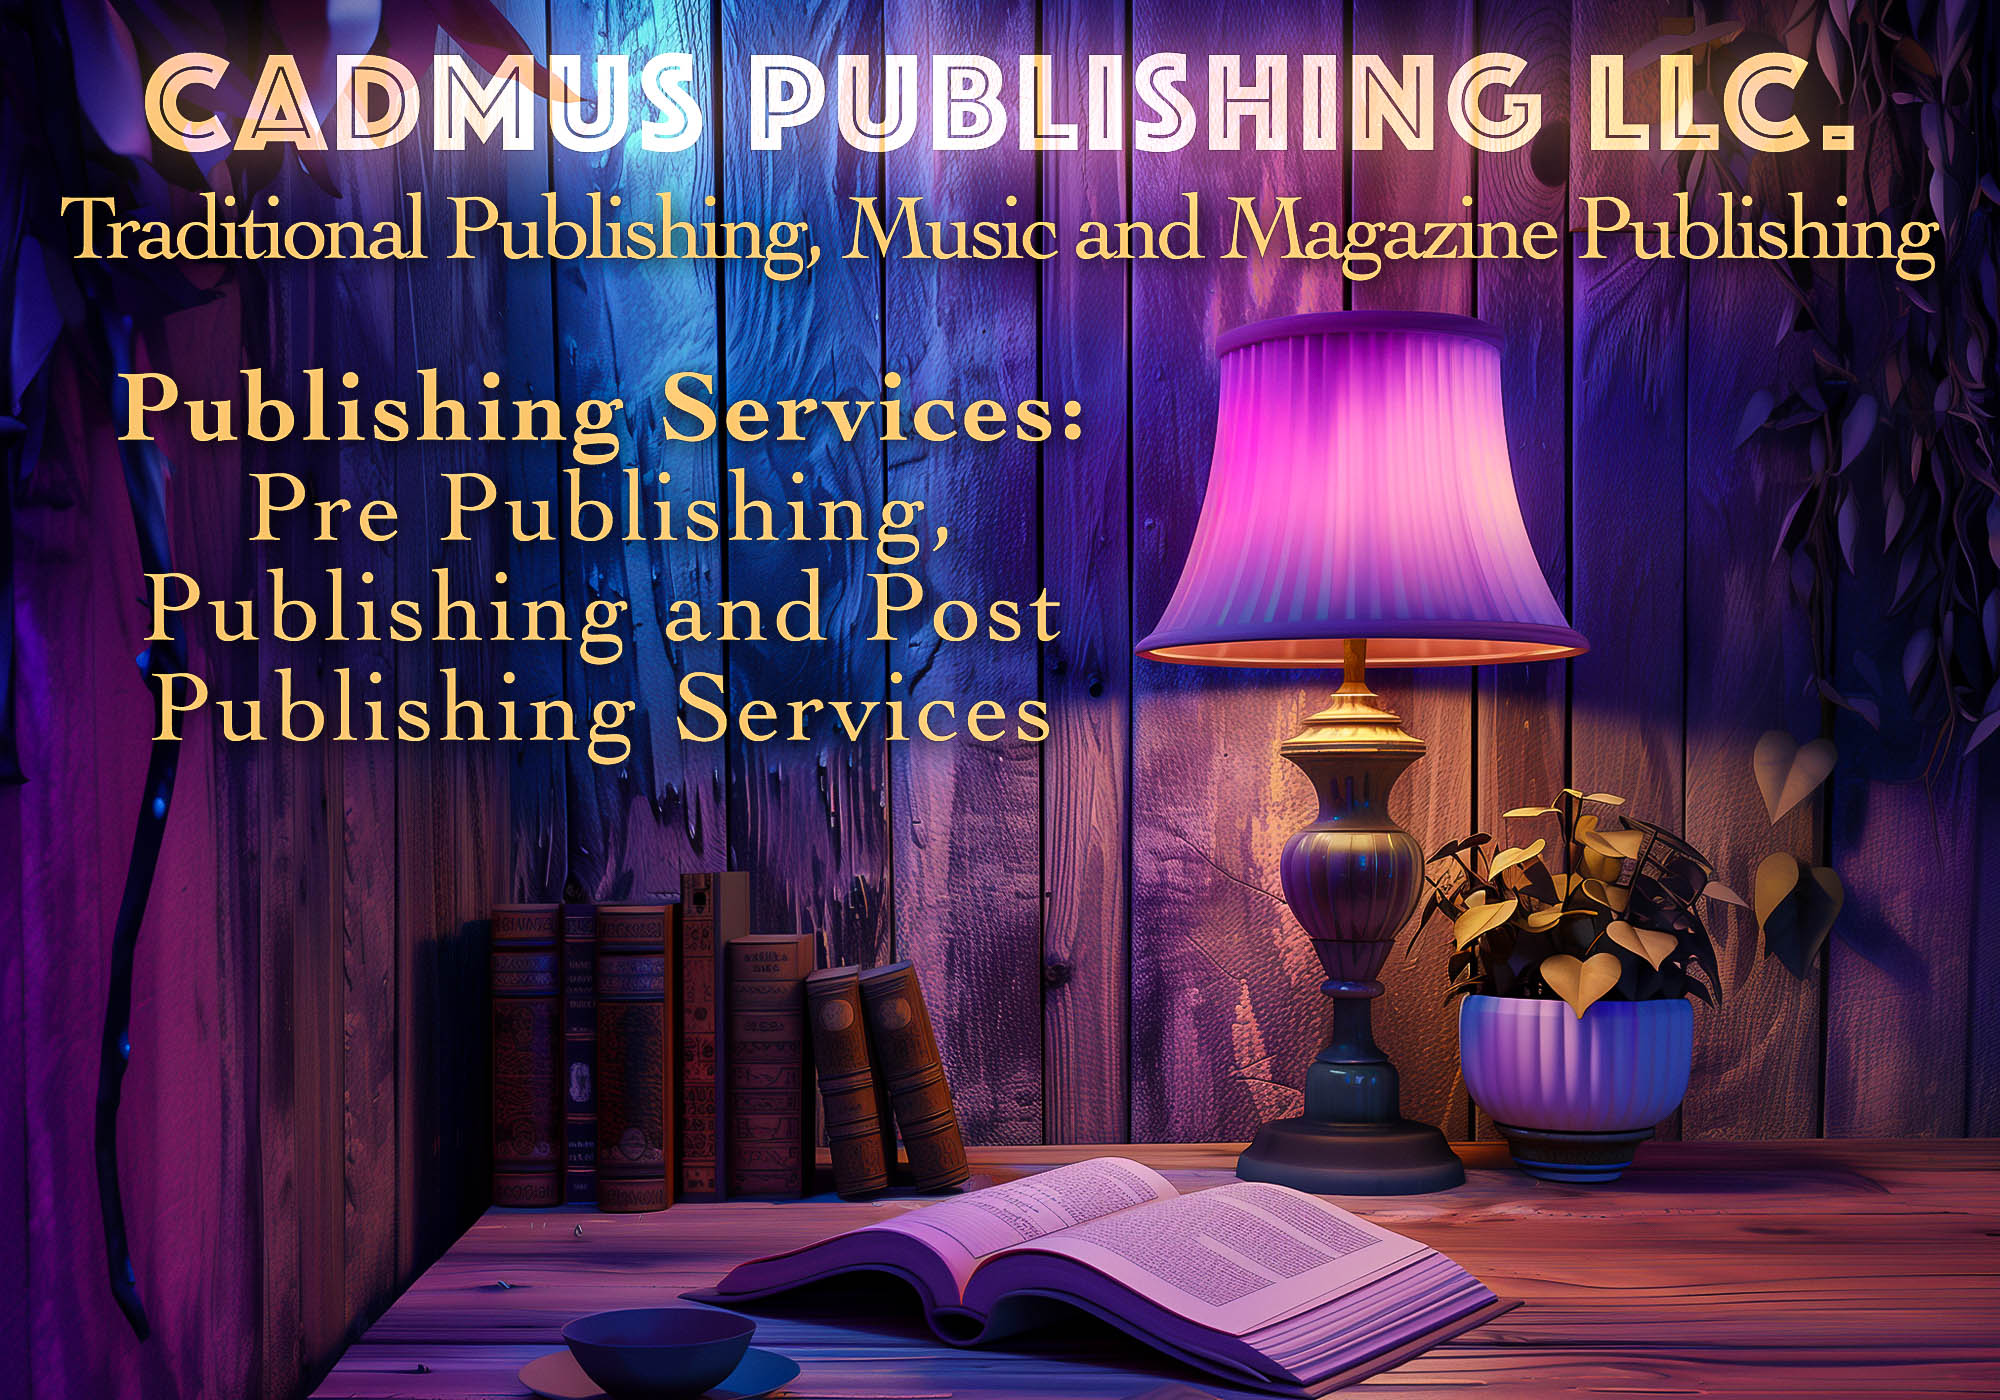 Cadmus Publishing offers book, music and magazine publishing in all areas of development